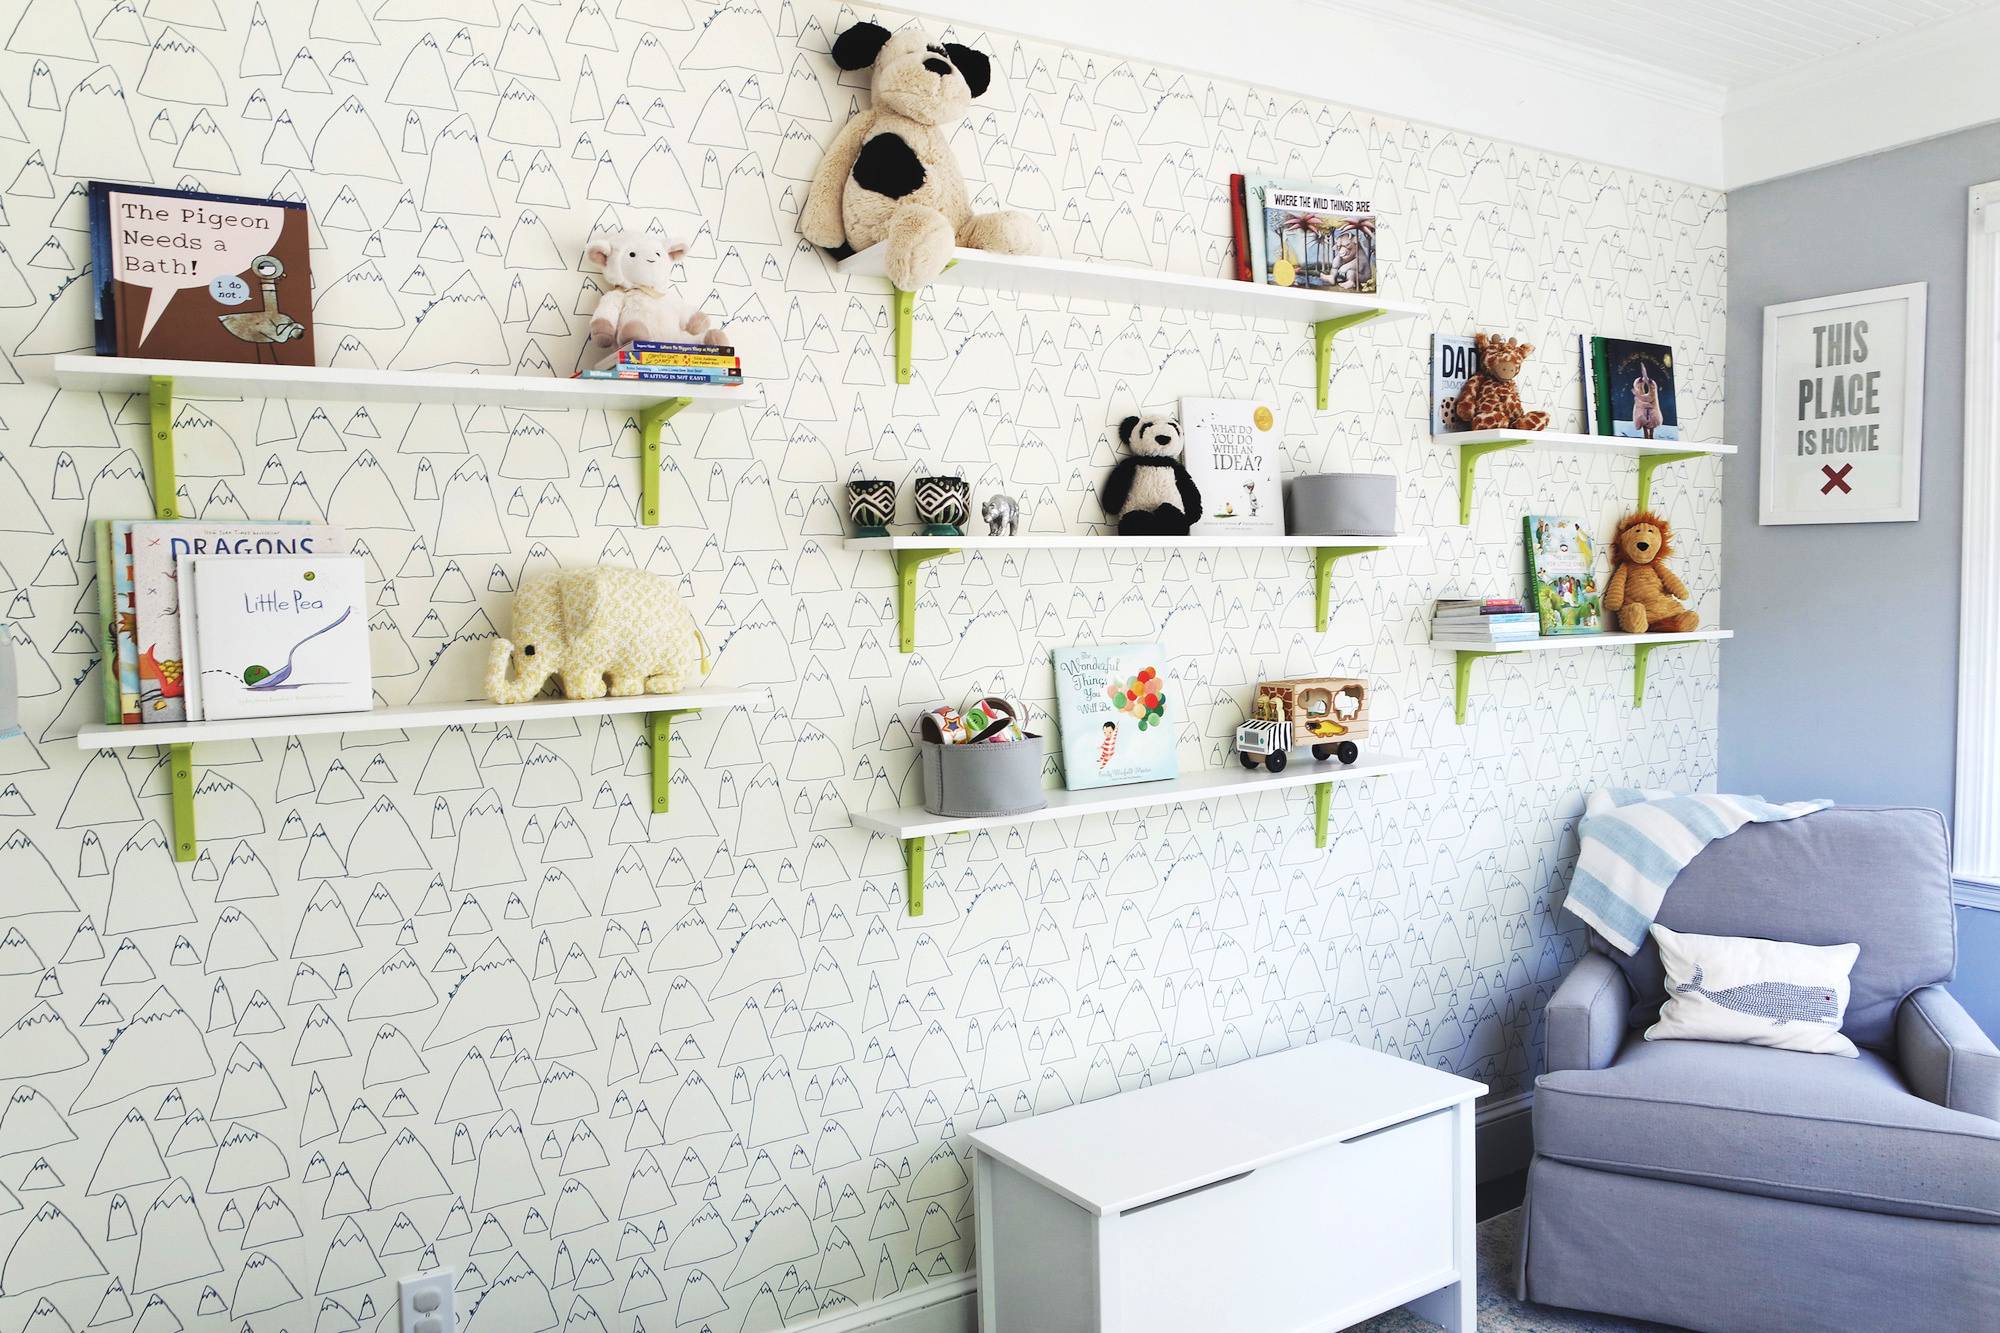 Playroom reveal - mixing bright greens with calming blues, this space is perfect for a growing family.